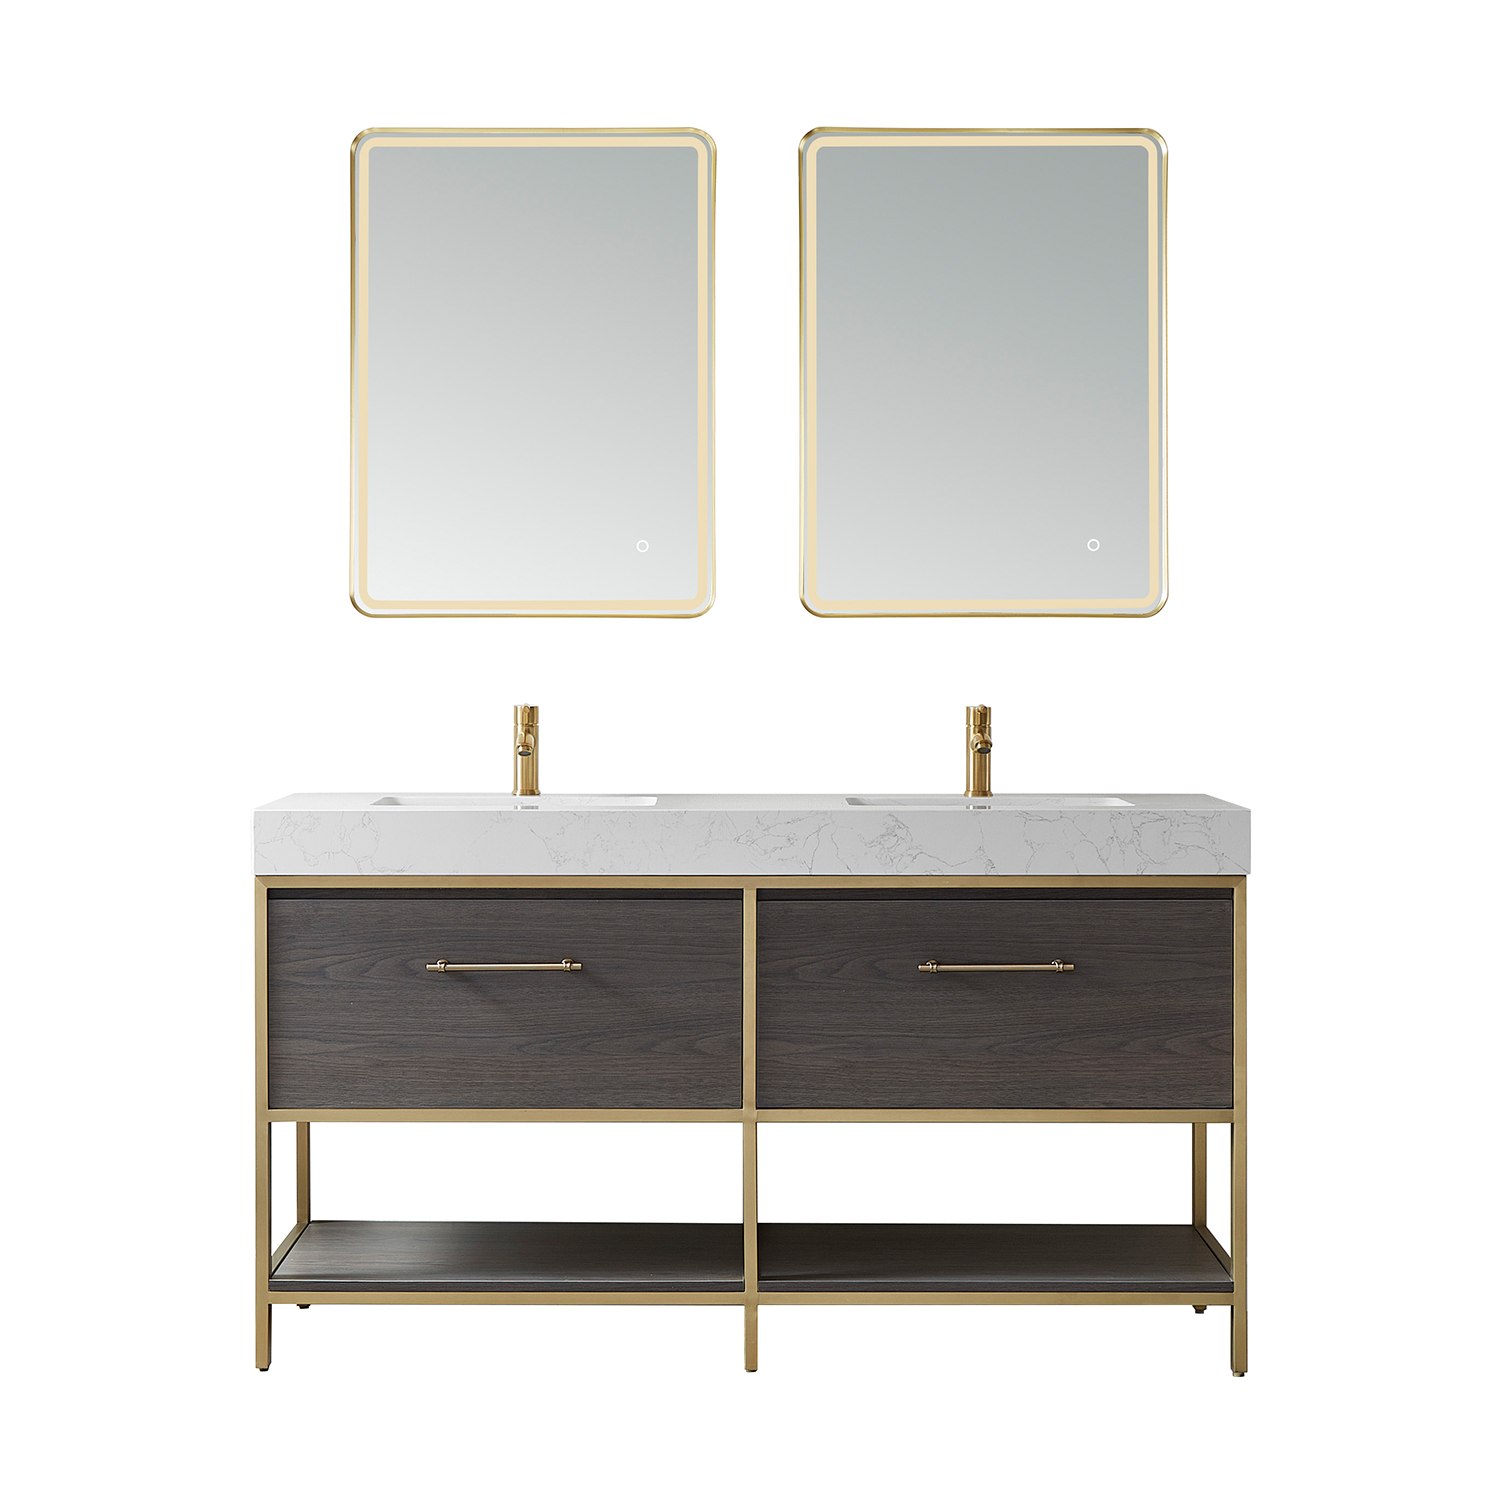 60G" Double Sink Bath Vanity in Suleiman Oak with White Composite Grain Stone Countertop without Mirror